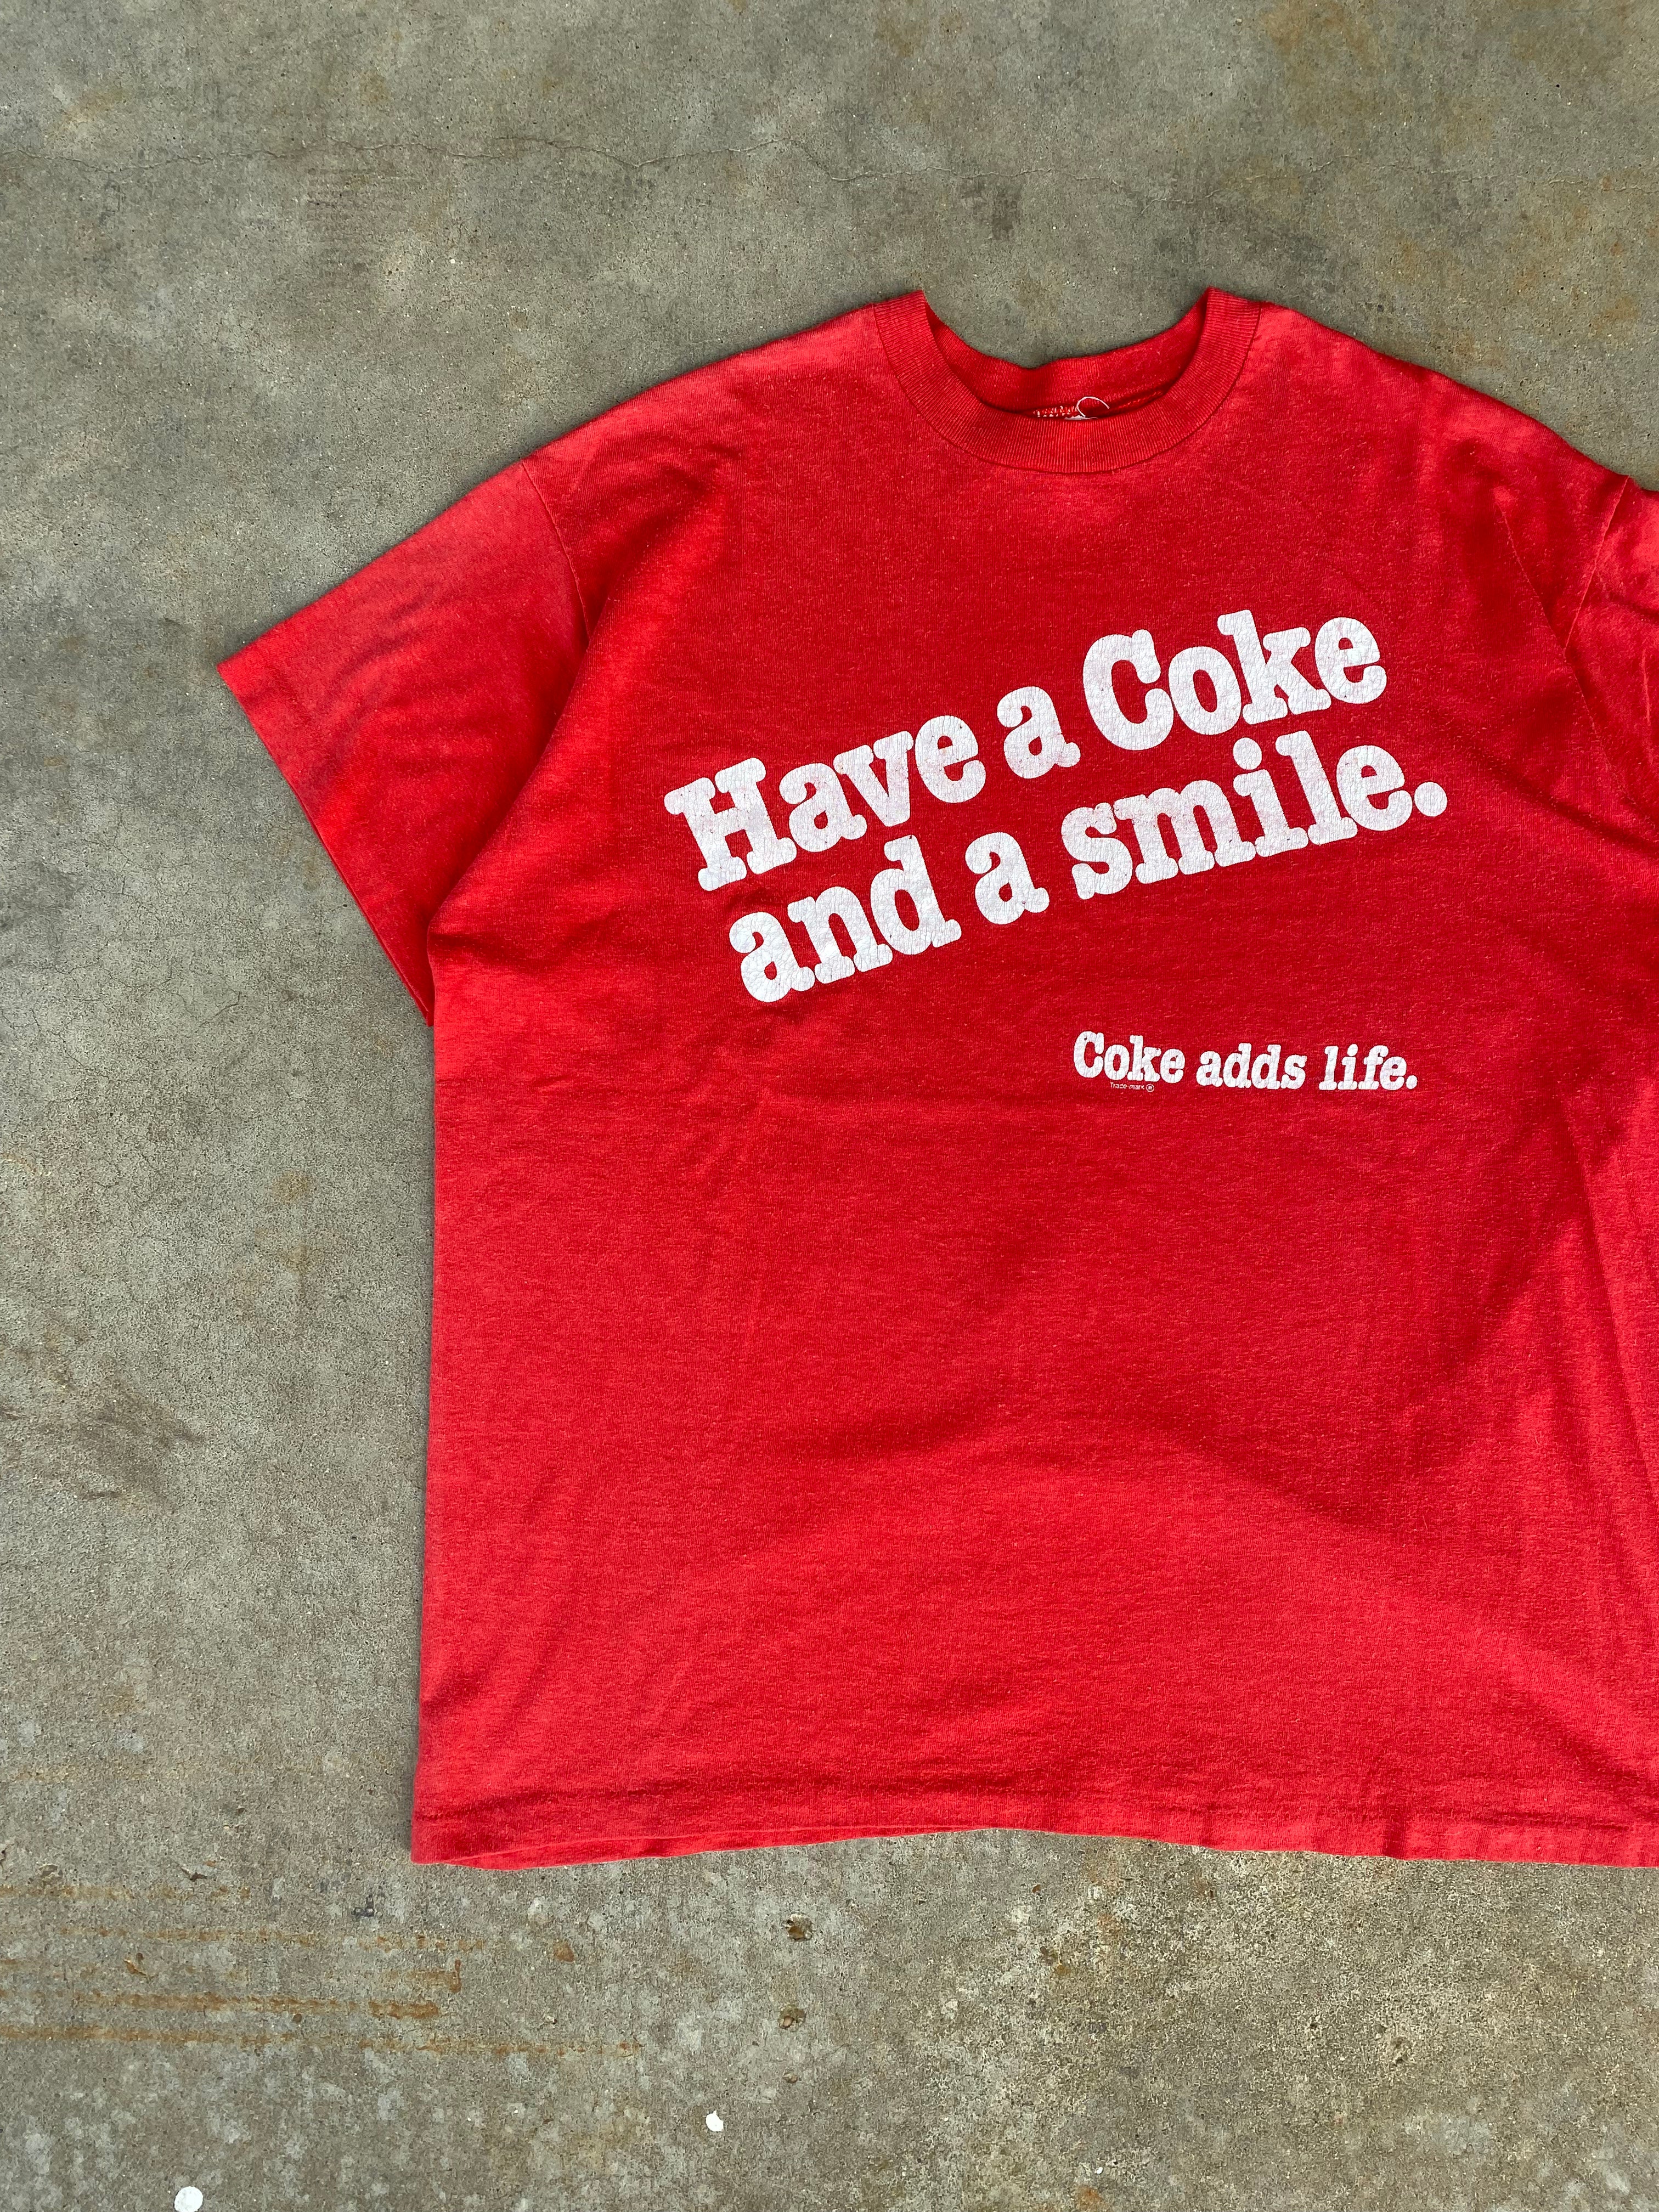 1980s Have a Coke and a Smile T-Shirt (L)